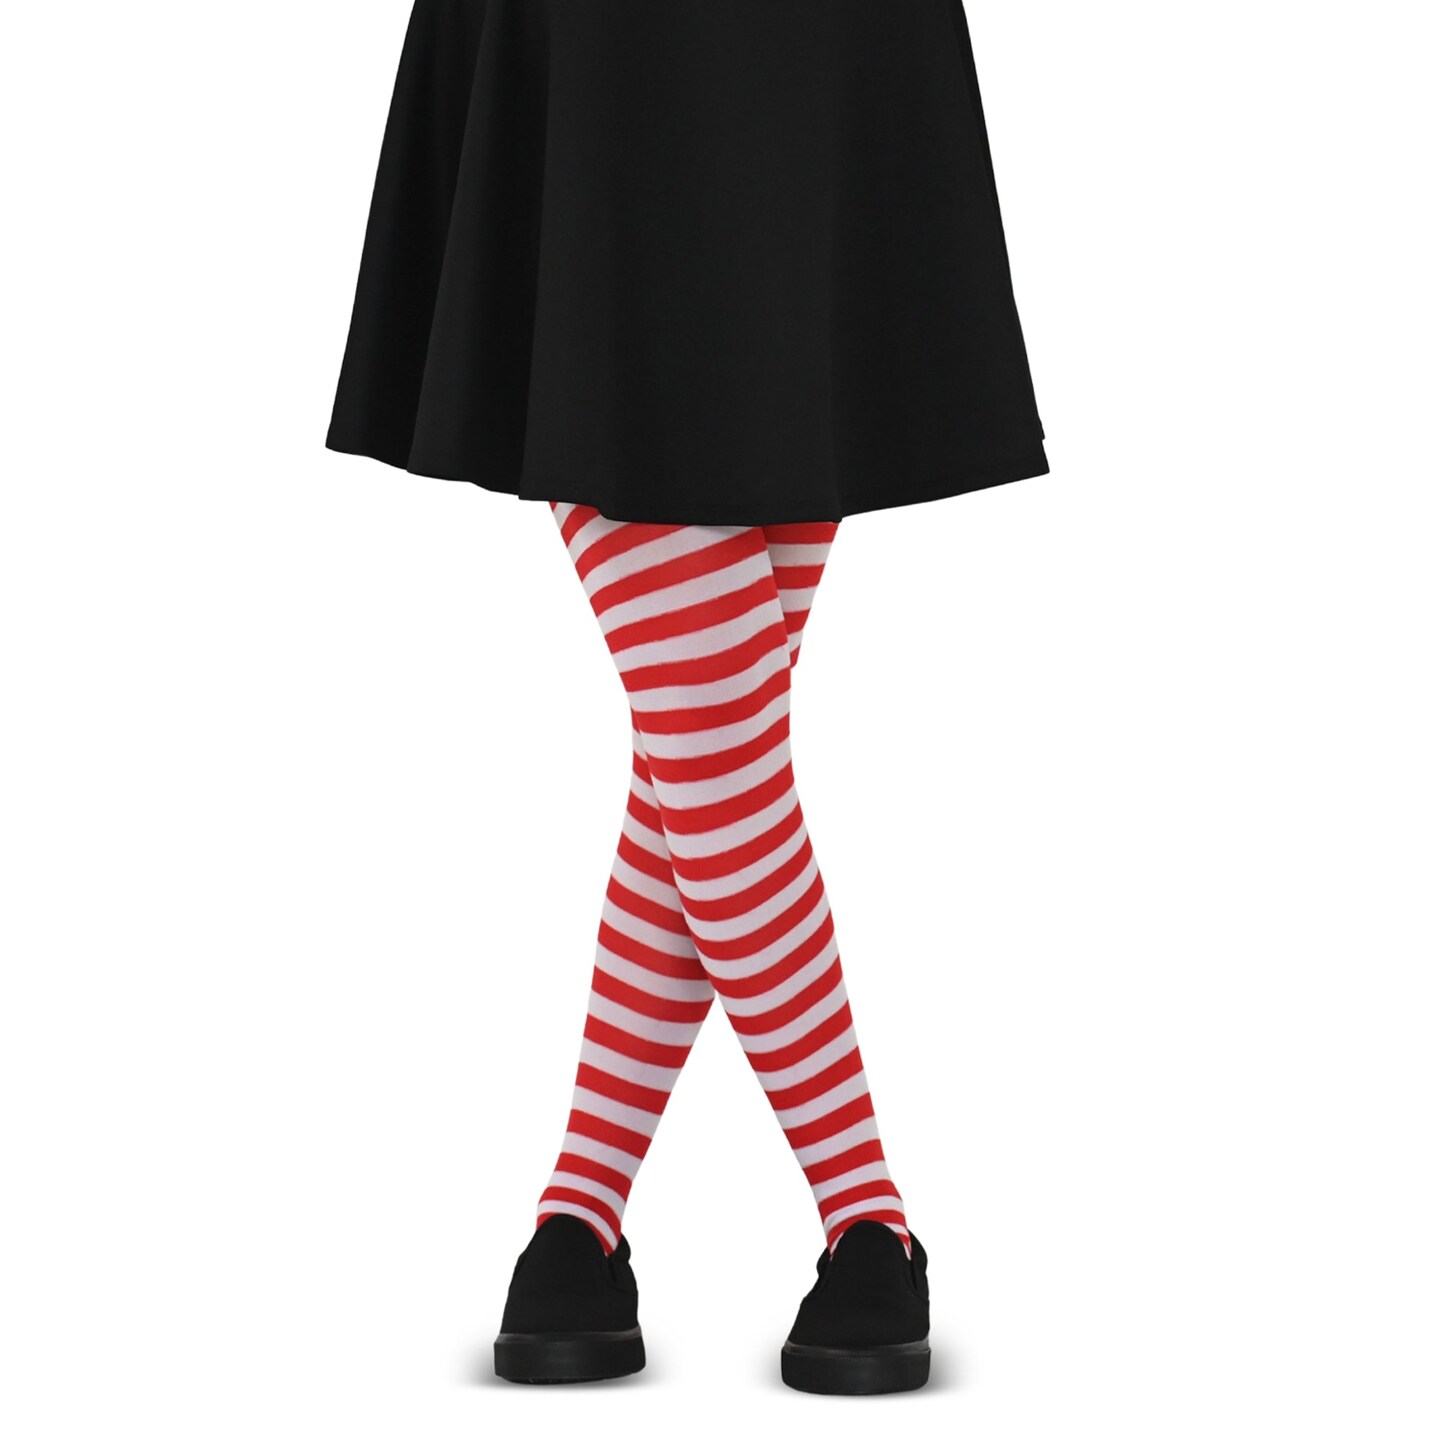 White and Red Tights - Striped Nylon Stretch Pantyhose Stocking Accessories  for Every Day Attire and Costumes for Teens and Kids